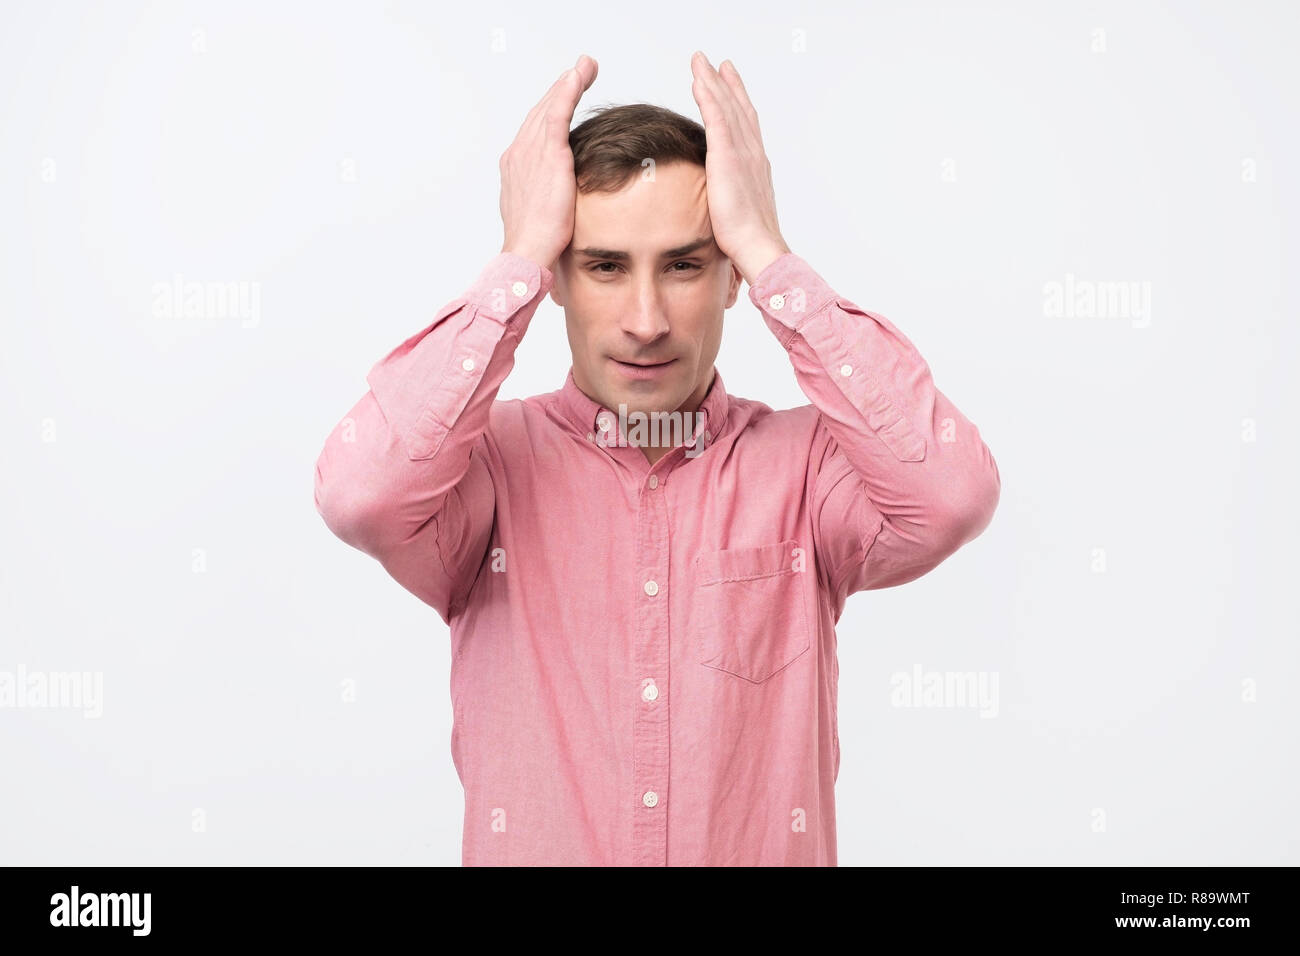 Mature man with hysterical expression holding his hands on head over white background. Stock Photo